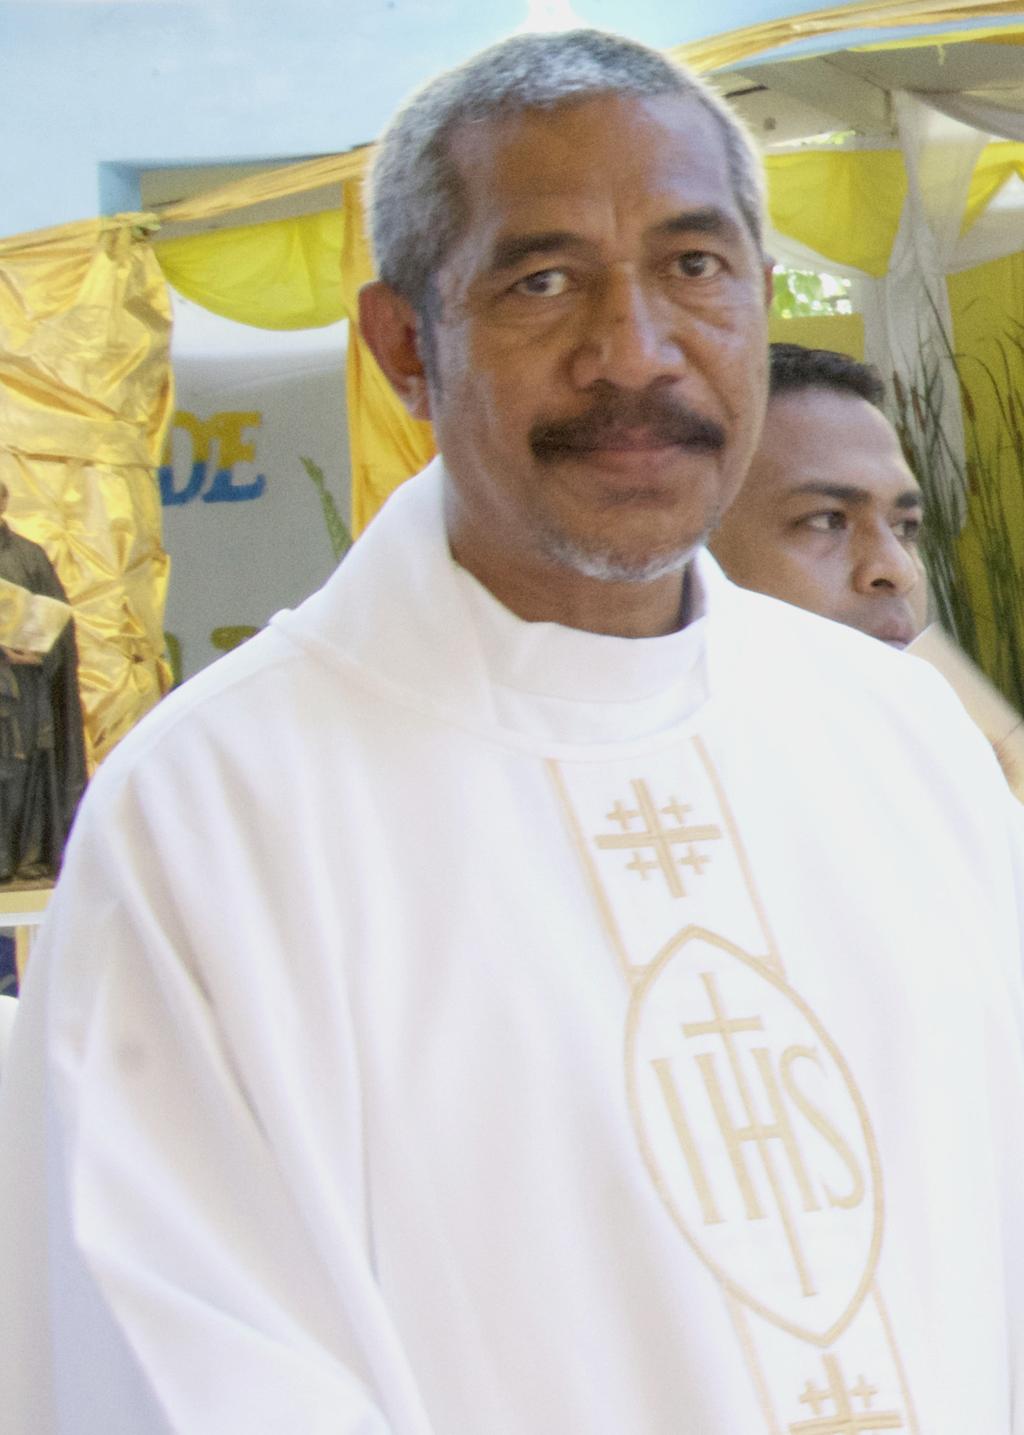 He is no longer the same Albino as before, but now one of alter-christus in our midst the bishop said. The Superior of the Jesuit Region of Timor Leste, Fr.